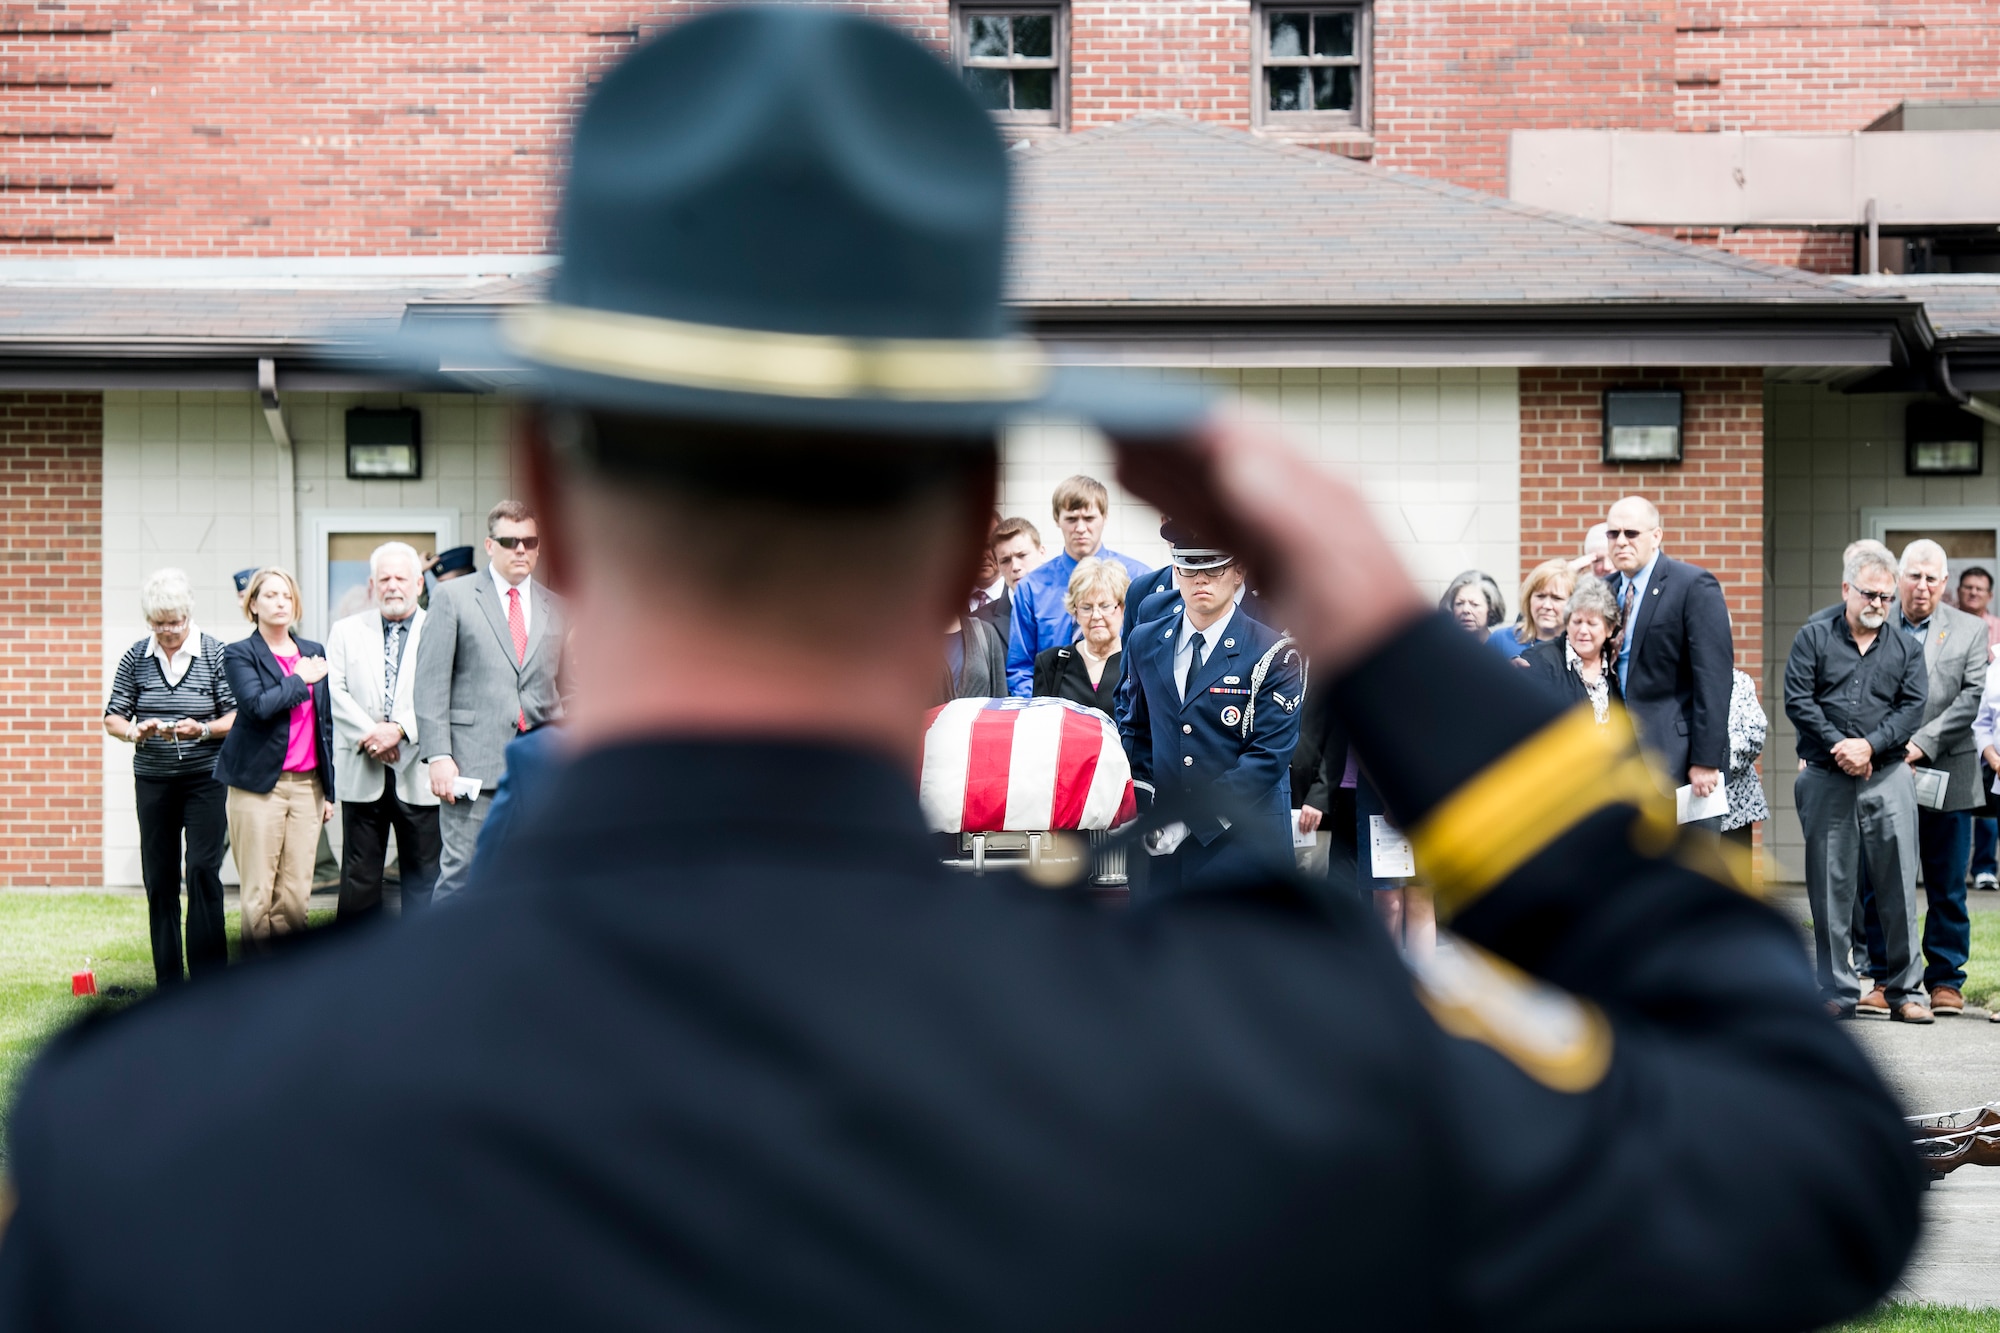 Joint Base Lewis-McChord Police officer Lt. Robert Rothrock salutes the casket of Air Force Capt. Douglas D. Ferguson May 2, 2014, as the McChord Honor Guard transfers Ferguson's remains to the hearse following the funeral service at Joint Base Lewis-McChord, Wash. Ferguson was later laid to rest close to where his parents were buried at Mountain View Funeral Home in Lakewood, Wash. (U.S. photo/Tech. Sgt. Sean Tobin)